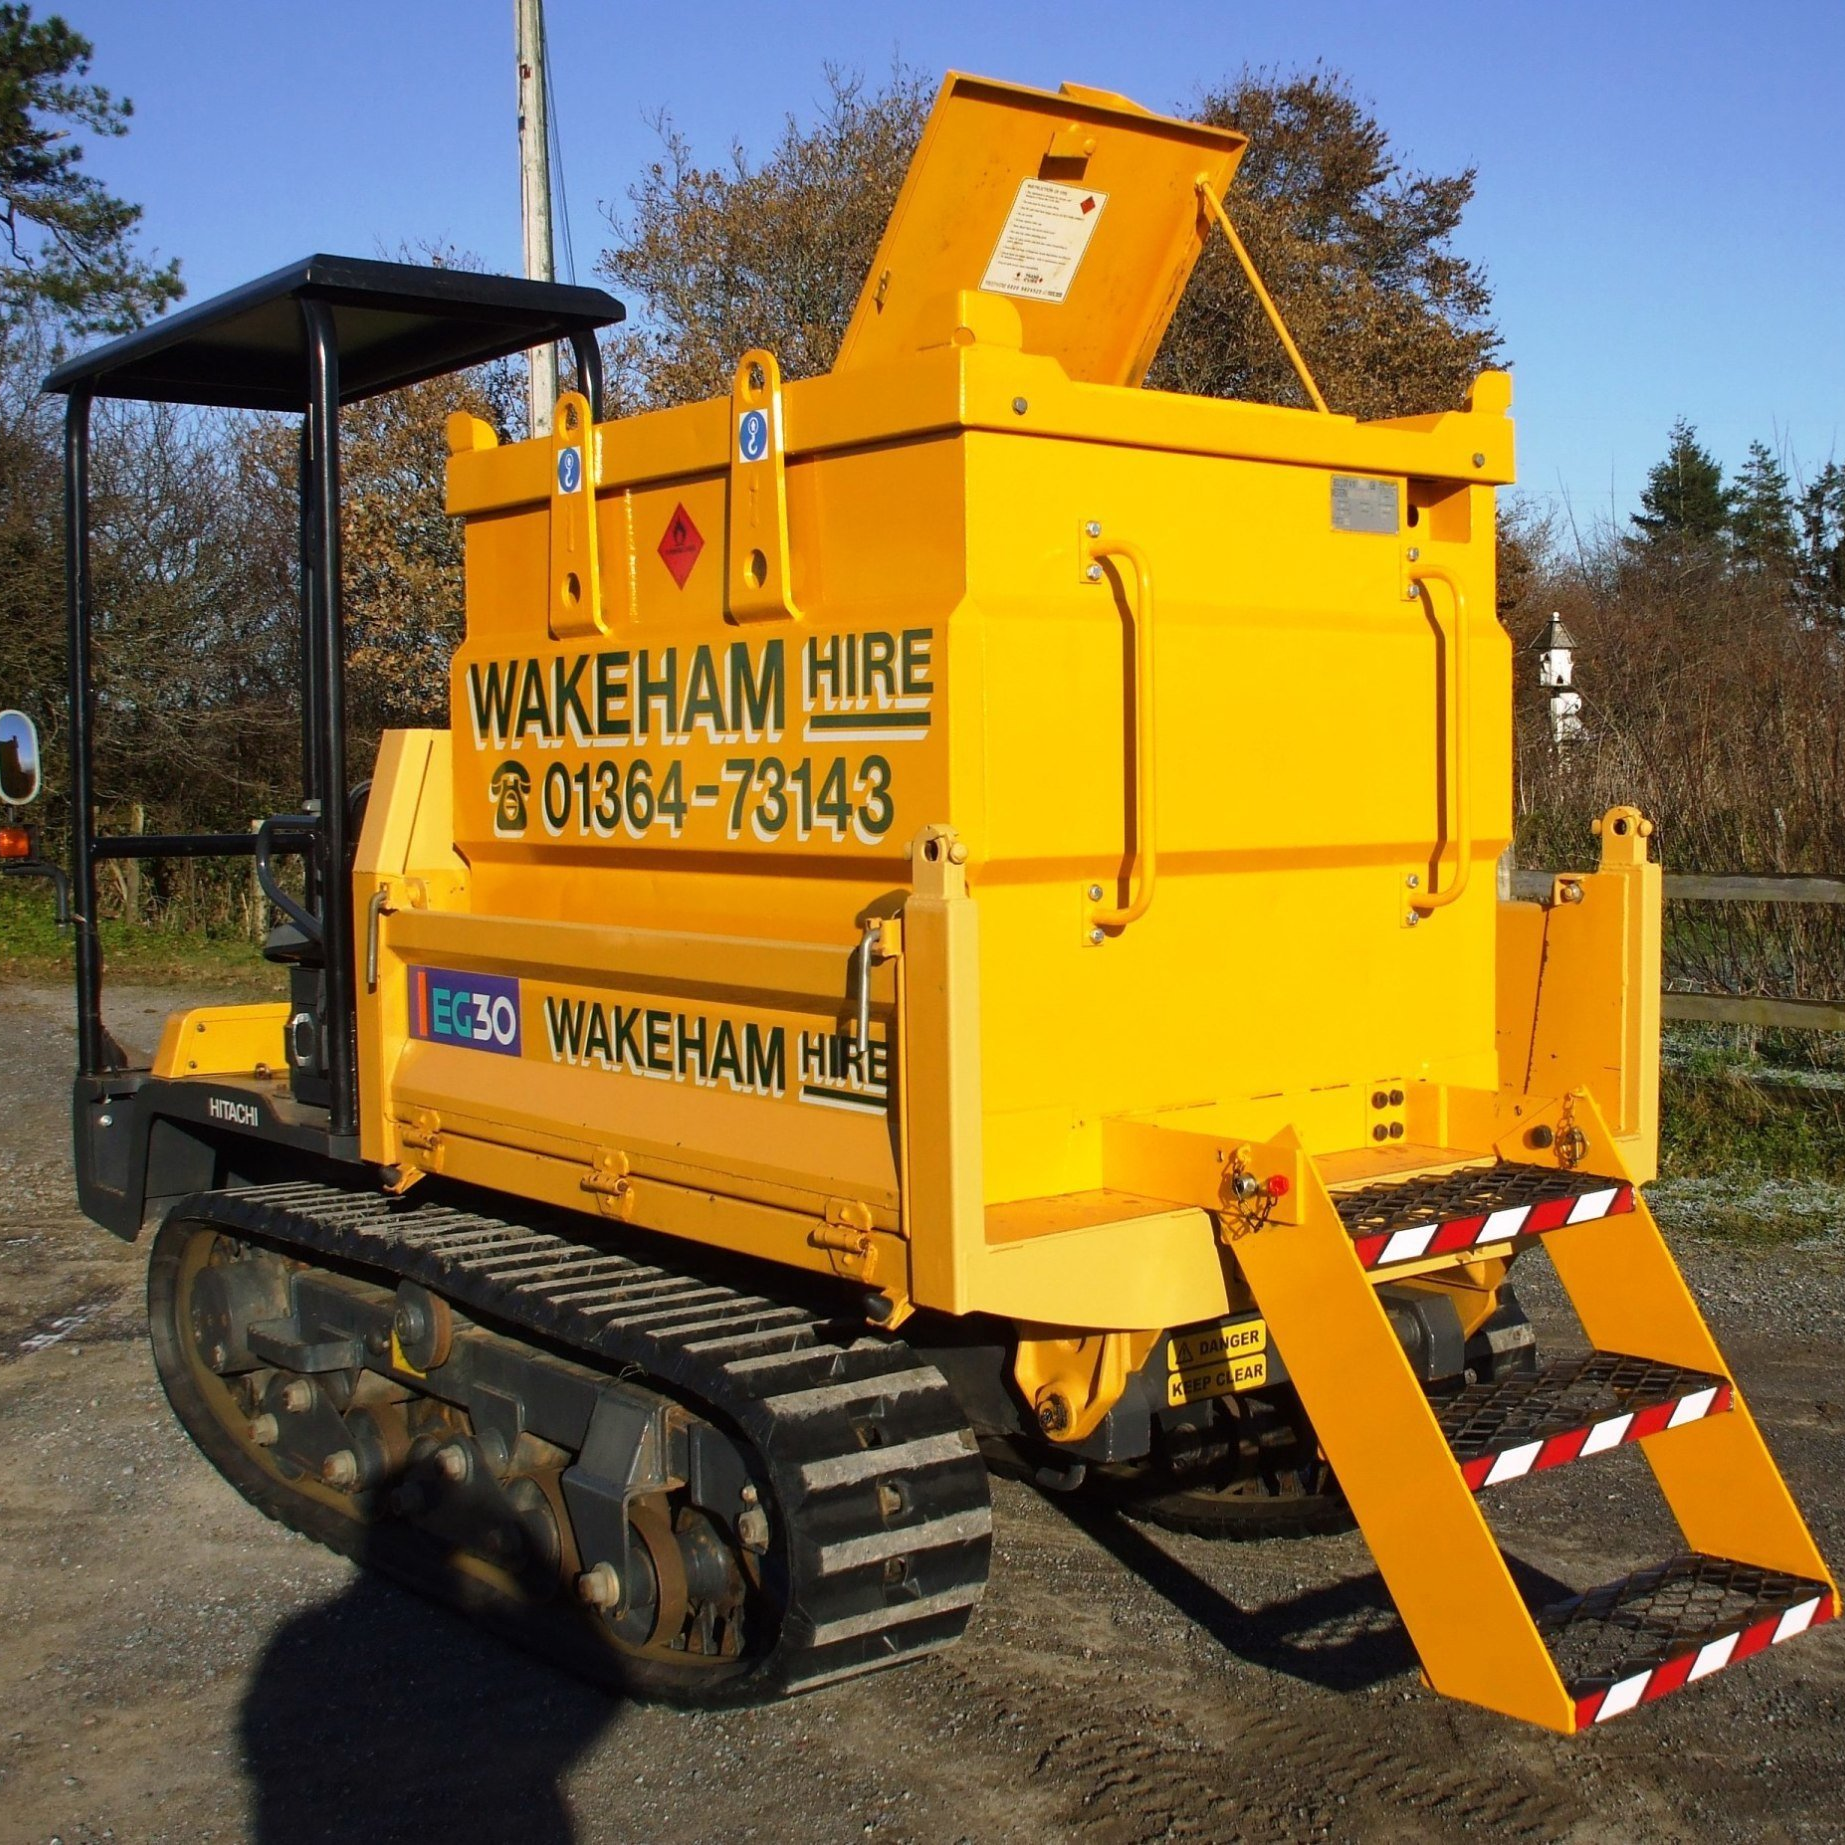 3 tonne tracked dumper with bowser